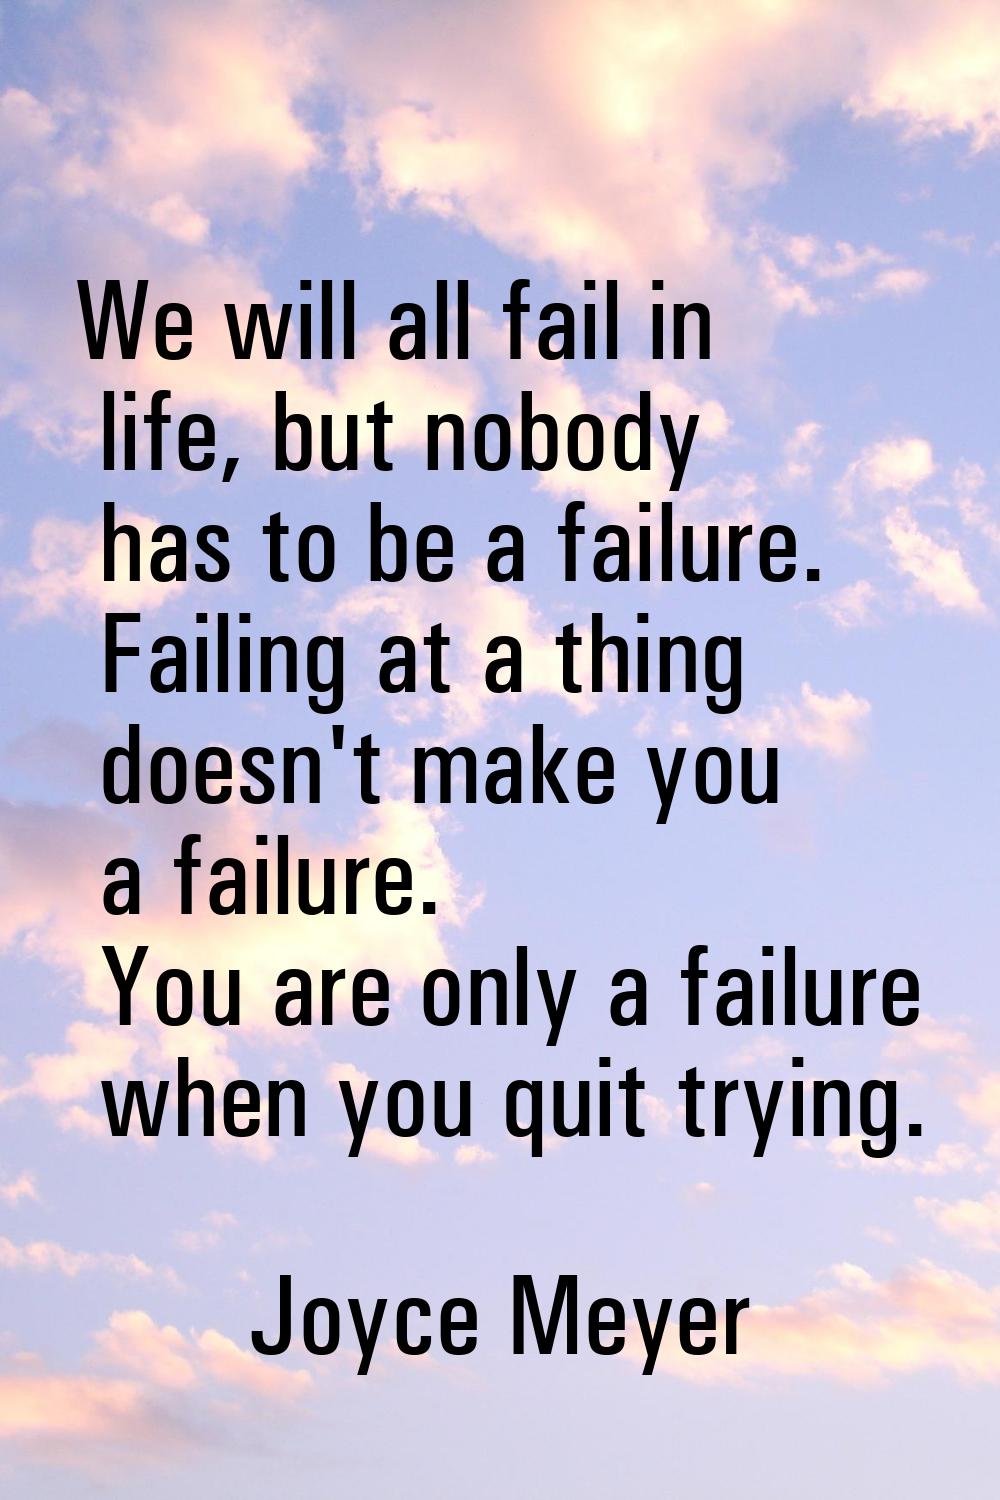 We will all fail in life, but nobody has to be a failure. Failing at a thing doesn't make you a fai